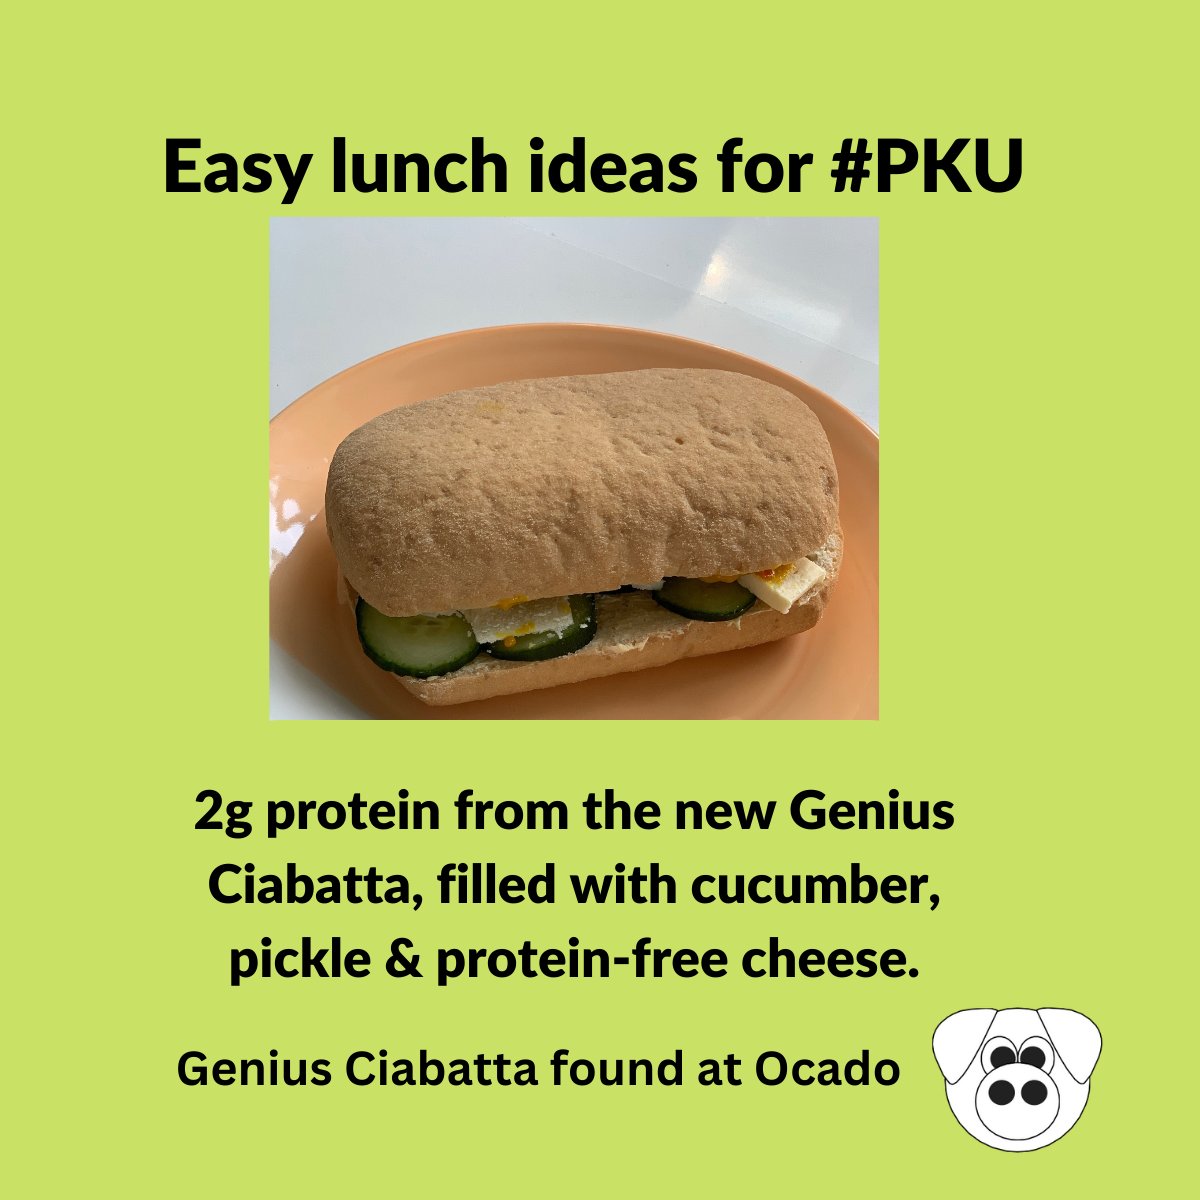 Easy #PKU Lunch ideas!
2g protein frm the new @Genius Ciabatta, filled with cucumber, pickle, & protein-free cheese (@Violife)

Ciabatta found @Ocado

#LivingWithPKU #AdultPKU #LowProtein